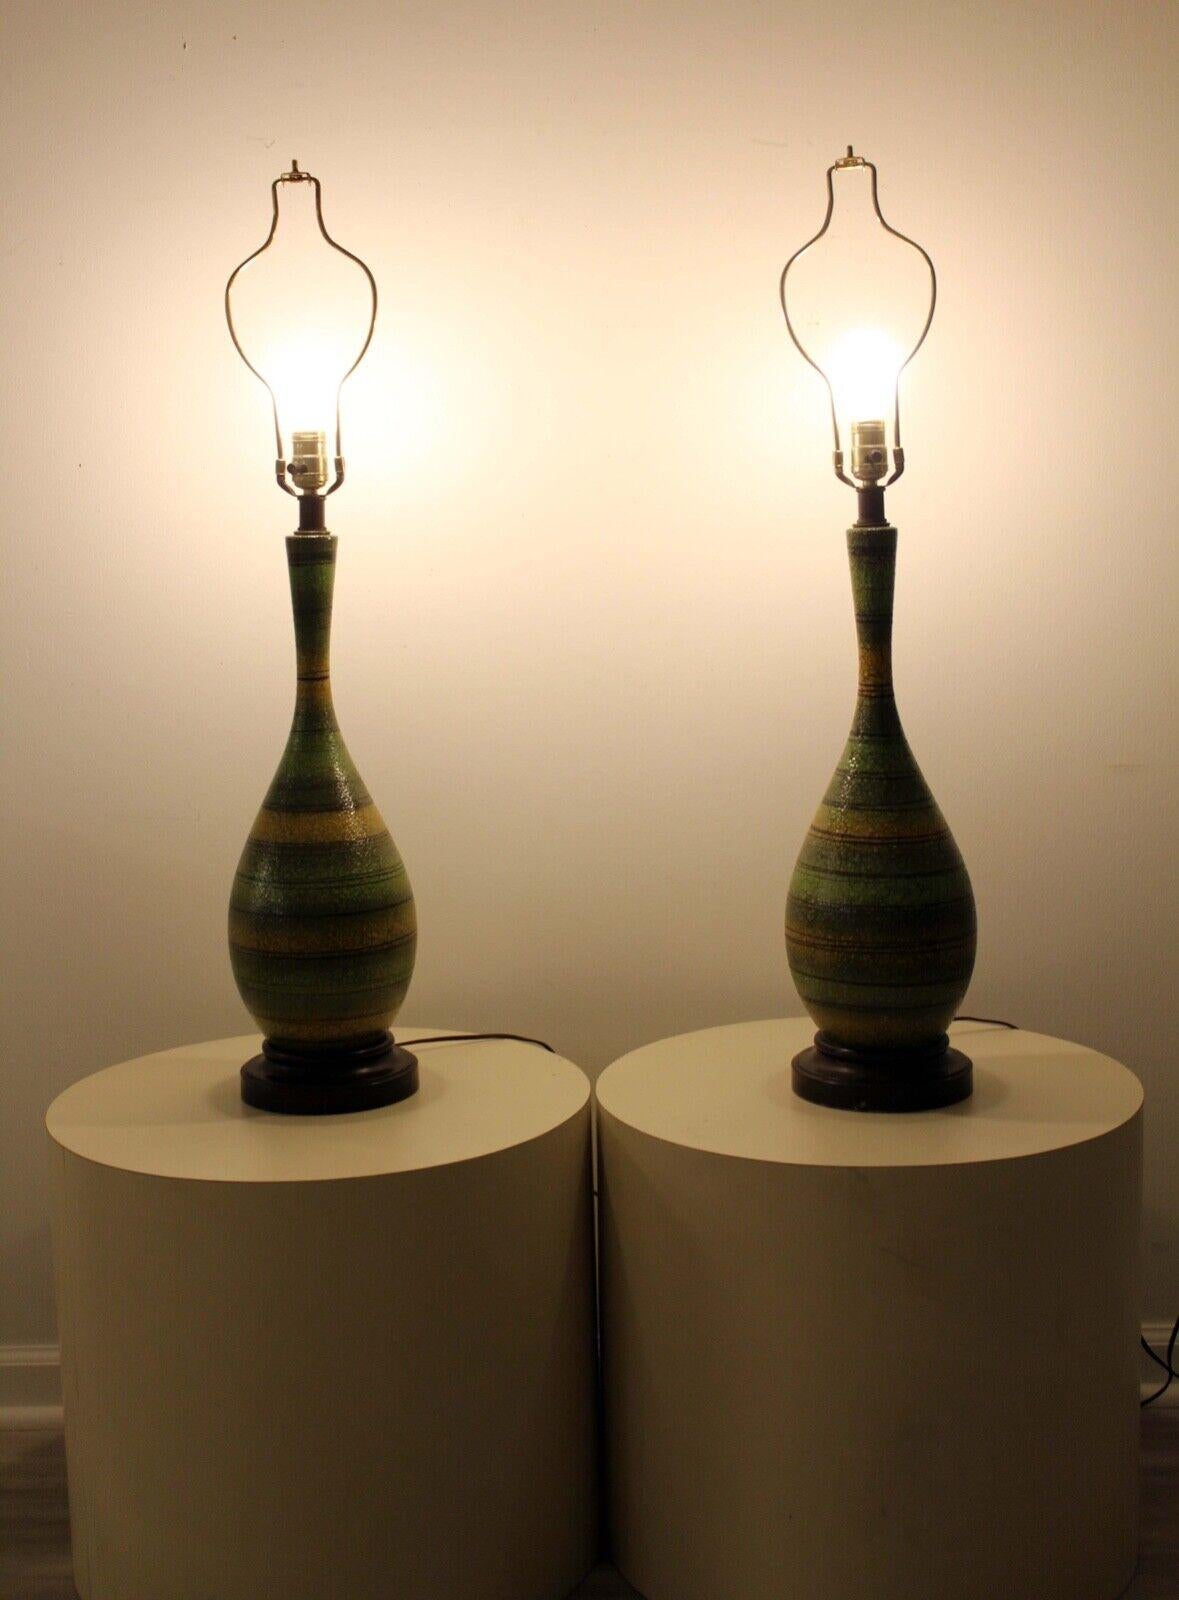 Pair of Mid-Century Modern Green Striped Ceramic Lamps For Sale 4